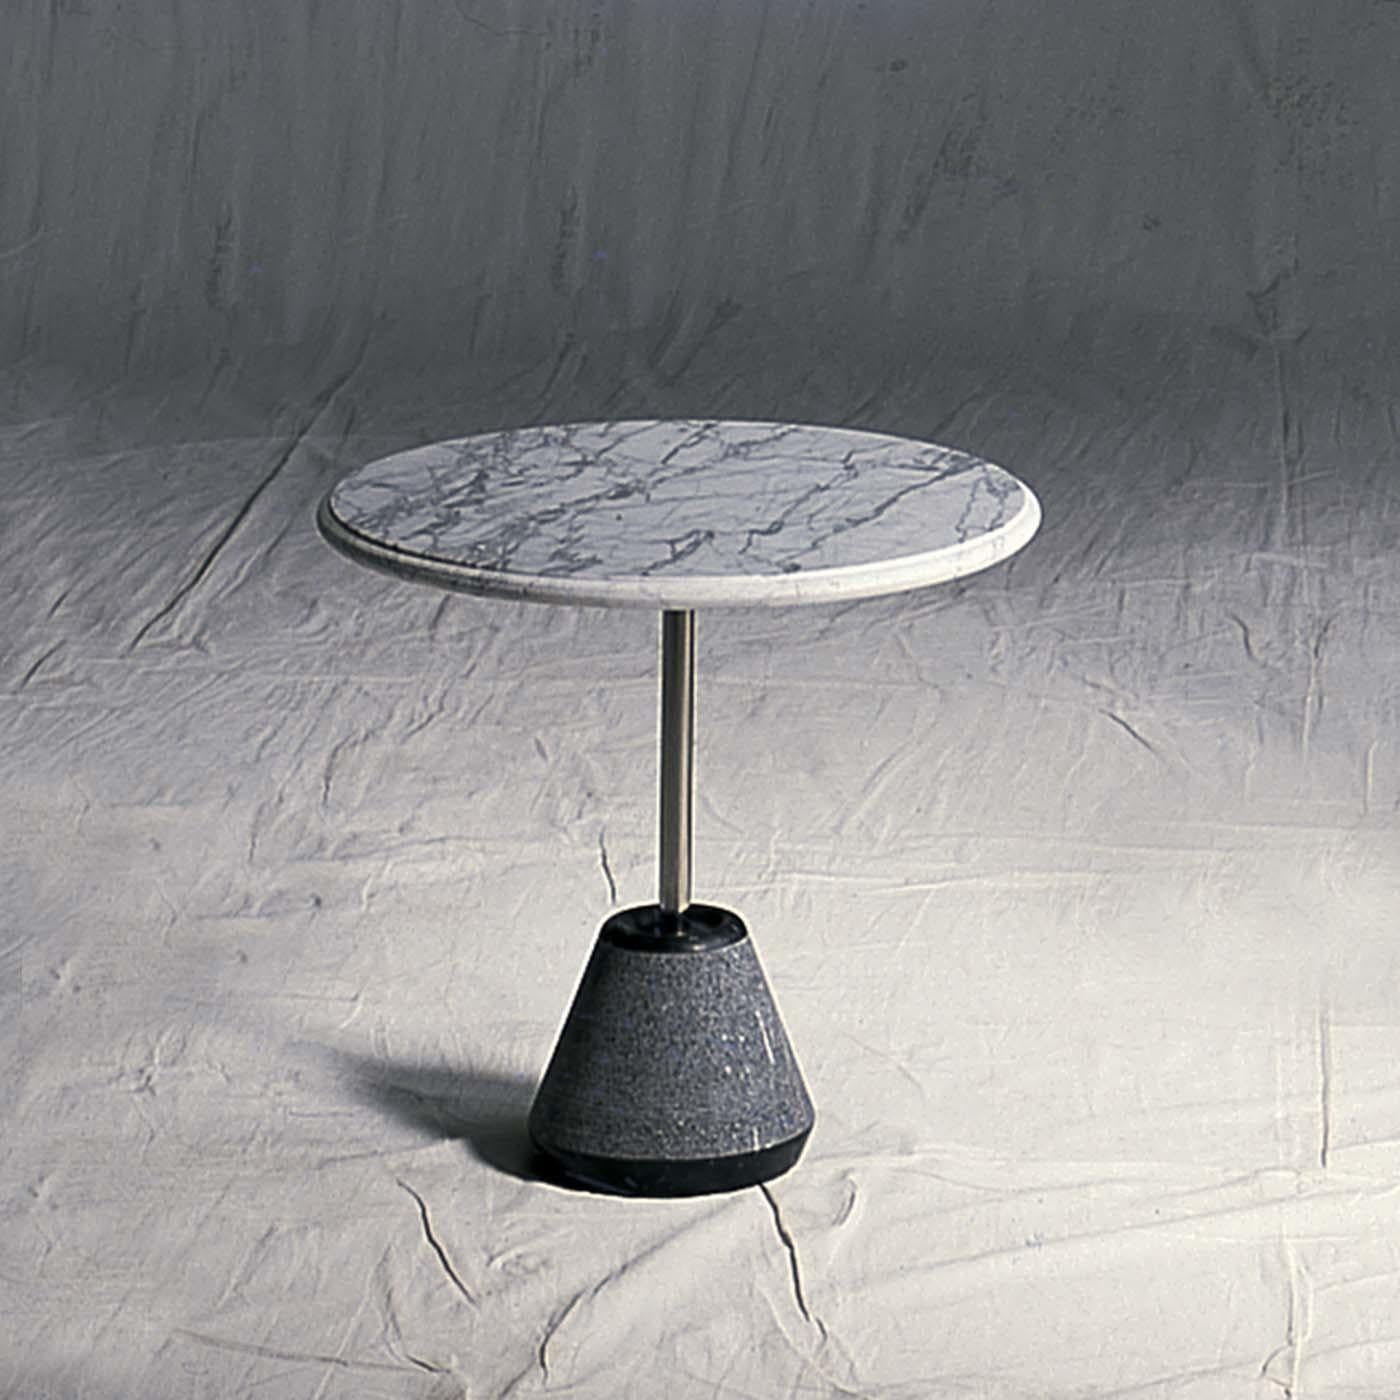 Designed by Achille Castiglioni exclusively for UpGroup in 1992, this minimalist table combines the elegance of the marble with a bold industrial design. Its defining characteristic is the splendid white Carrara marble top that stands out for its